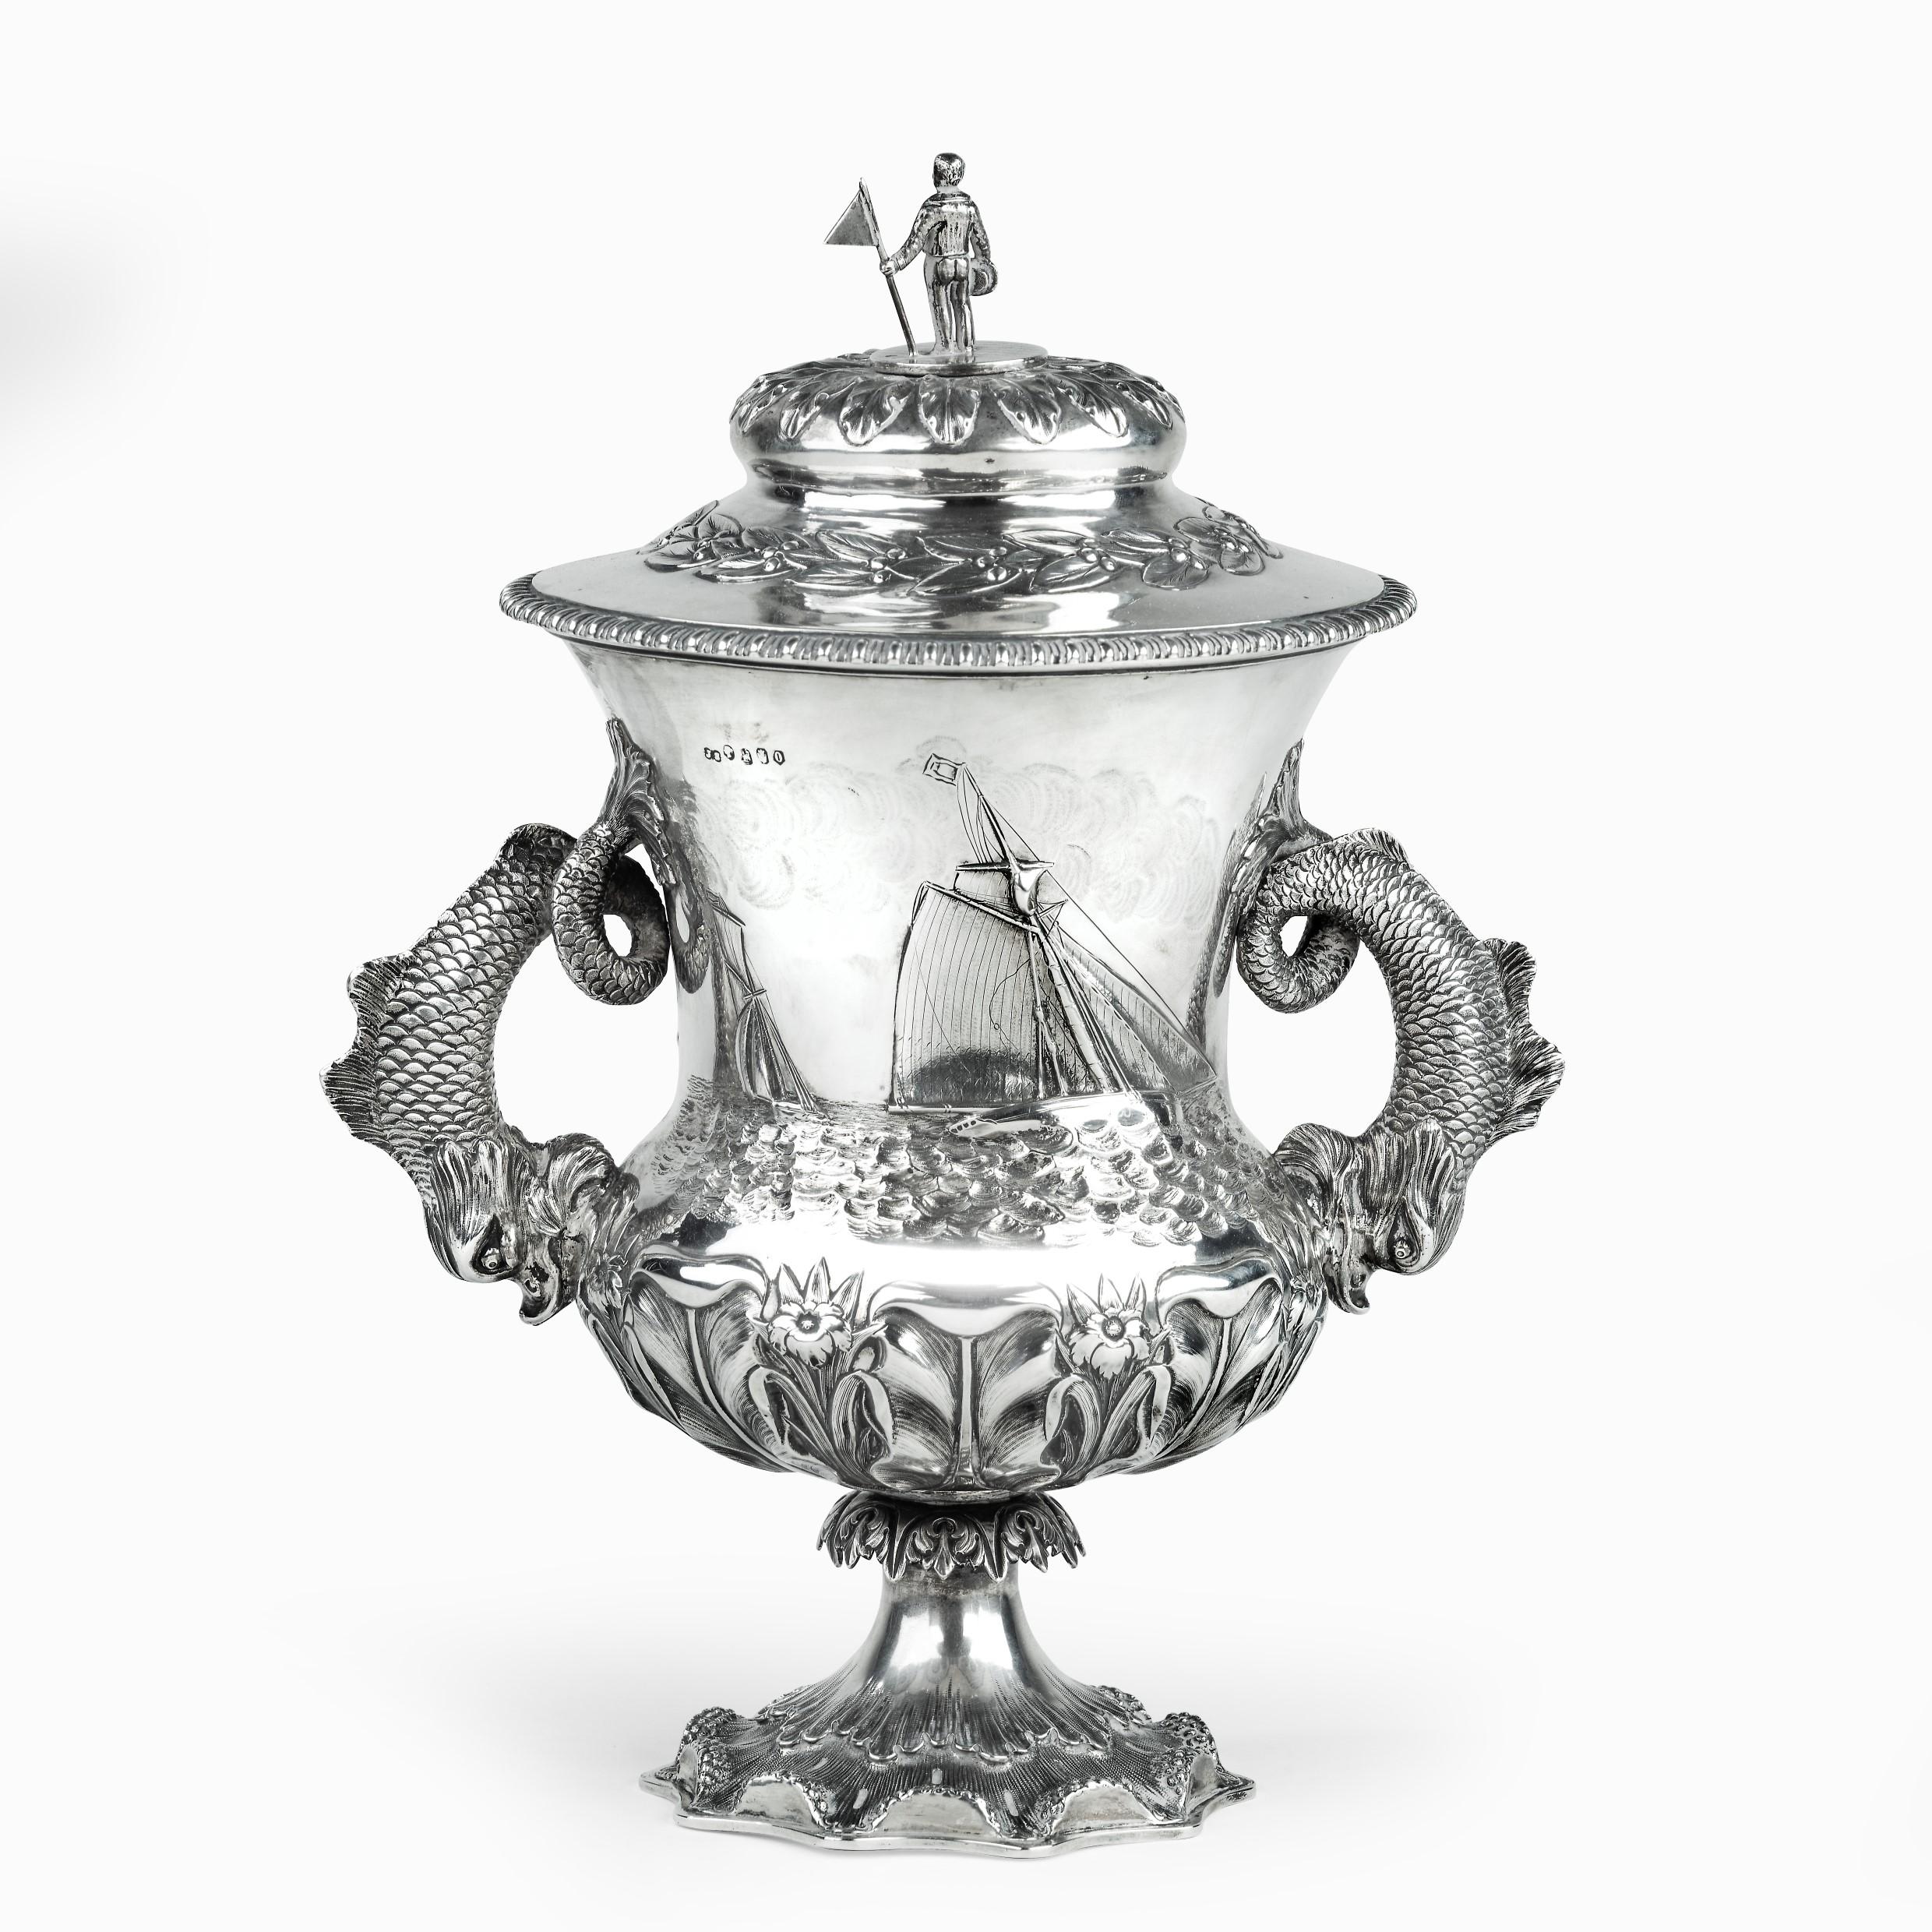 Shannon Yacht Club Silver Racing Trophy for 1859 2